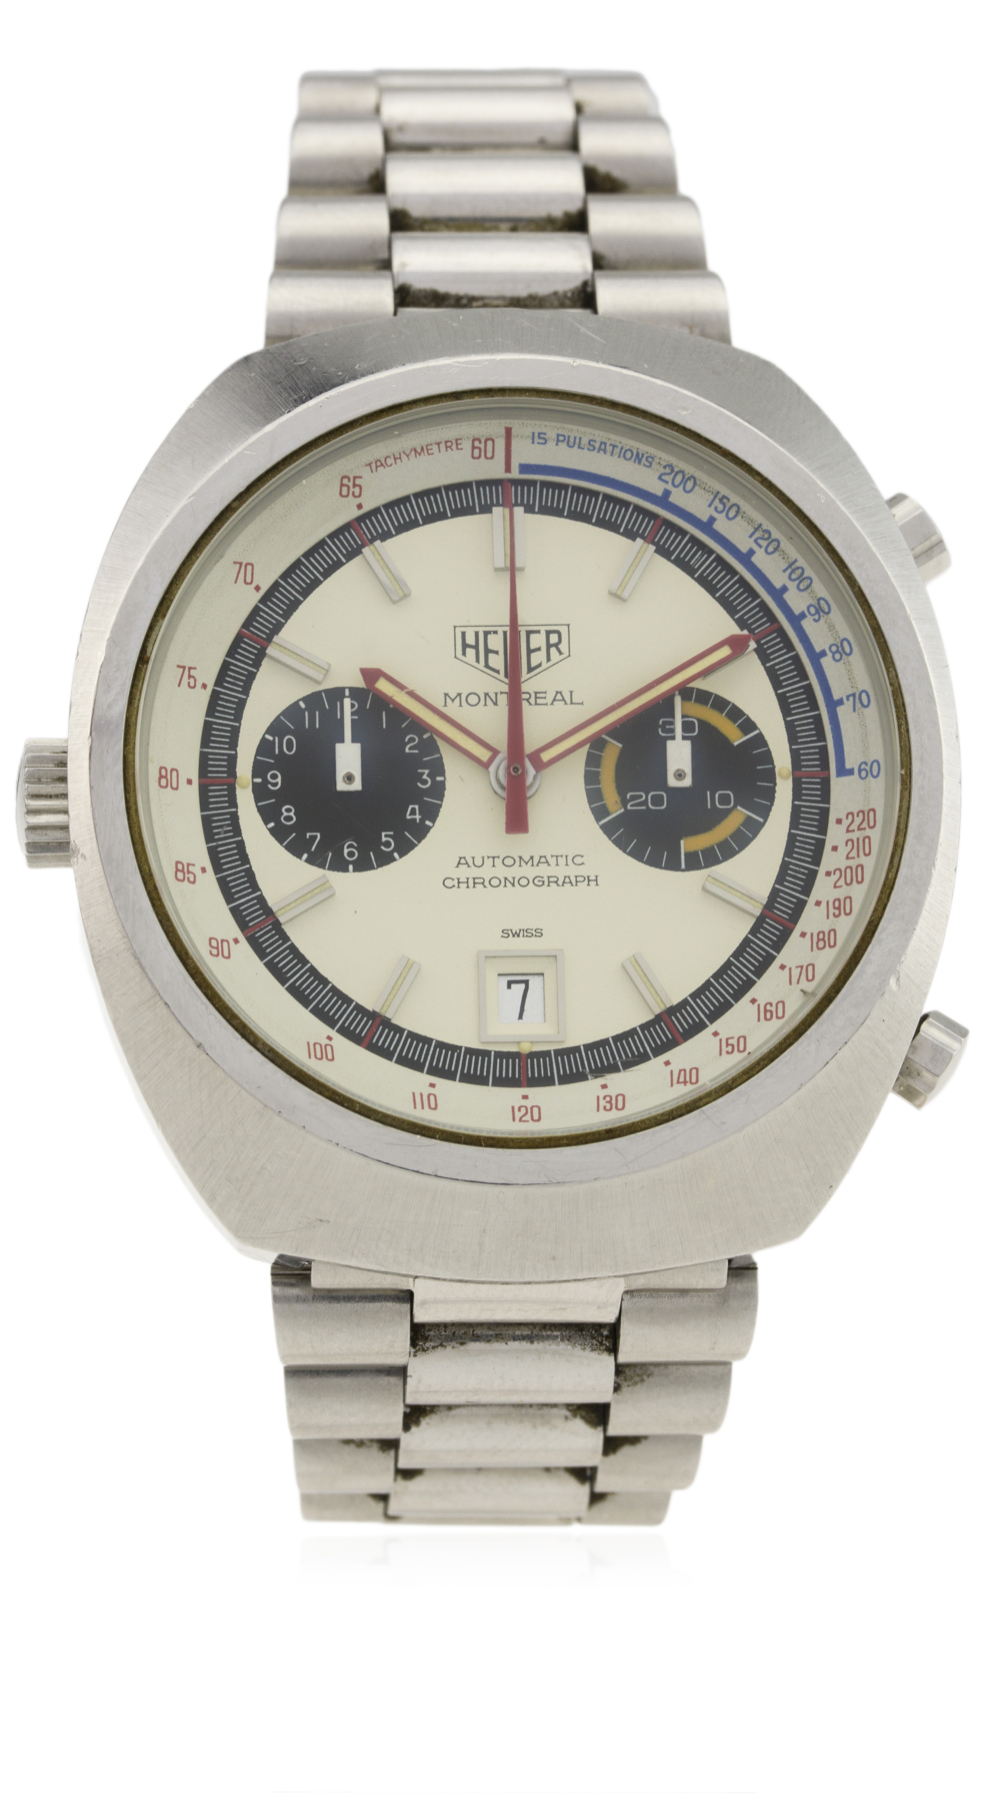 A RARE GENTLEMAN'S STAINLESS STEEL HEUER MONTREAL AUTOMATIC CHRONOGRAPH BRACELET WATCH CIRCA